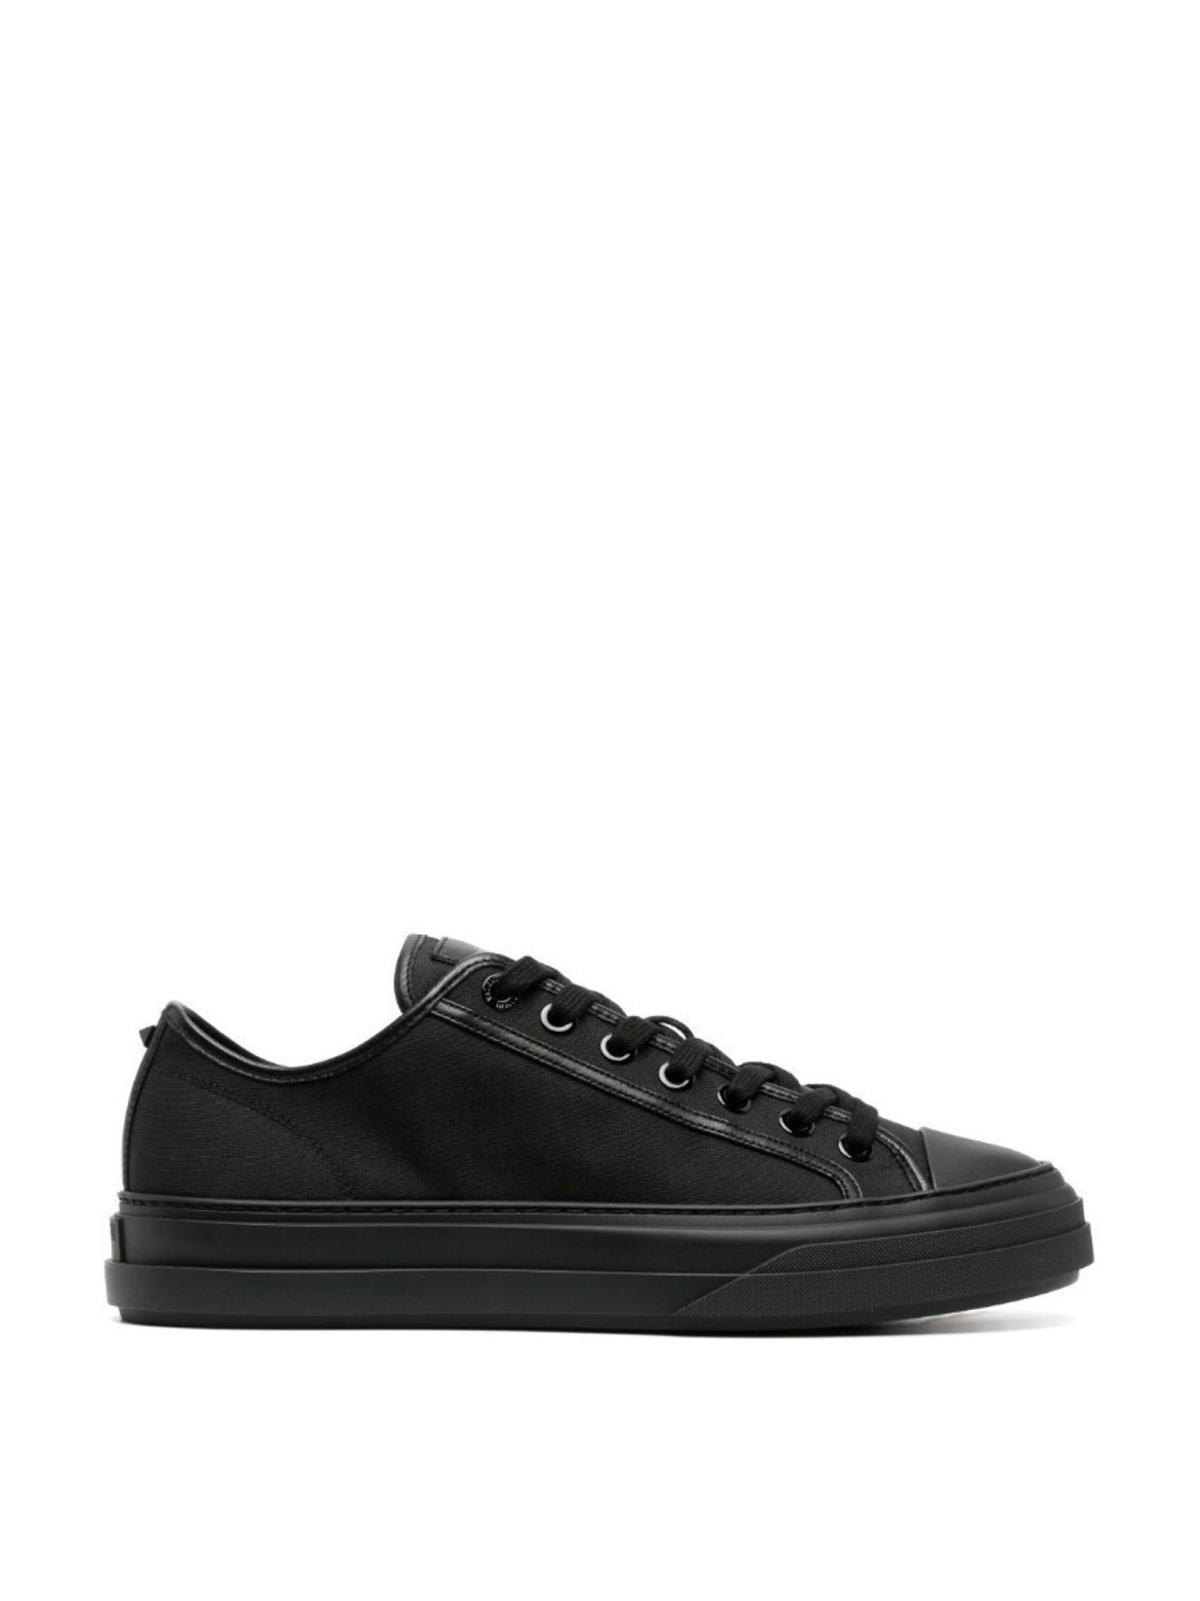 Rockstud Lace-Up Sneakers